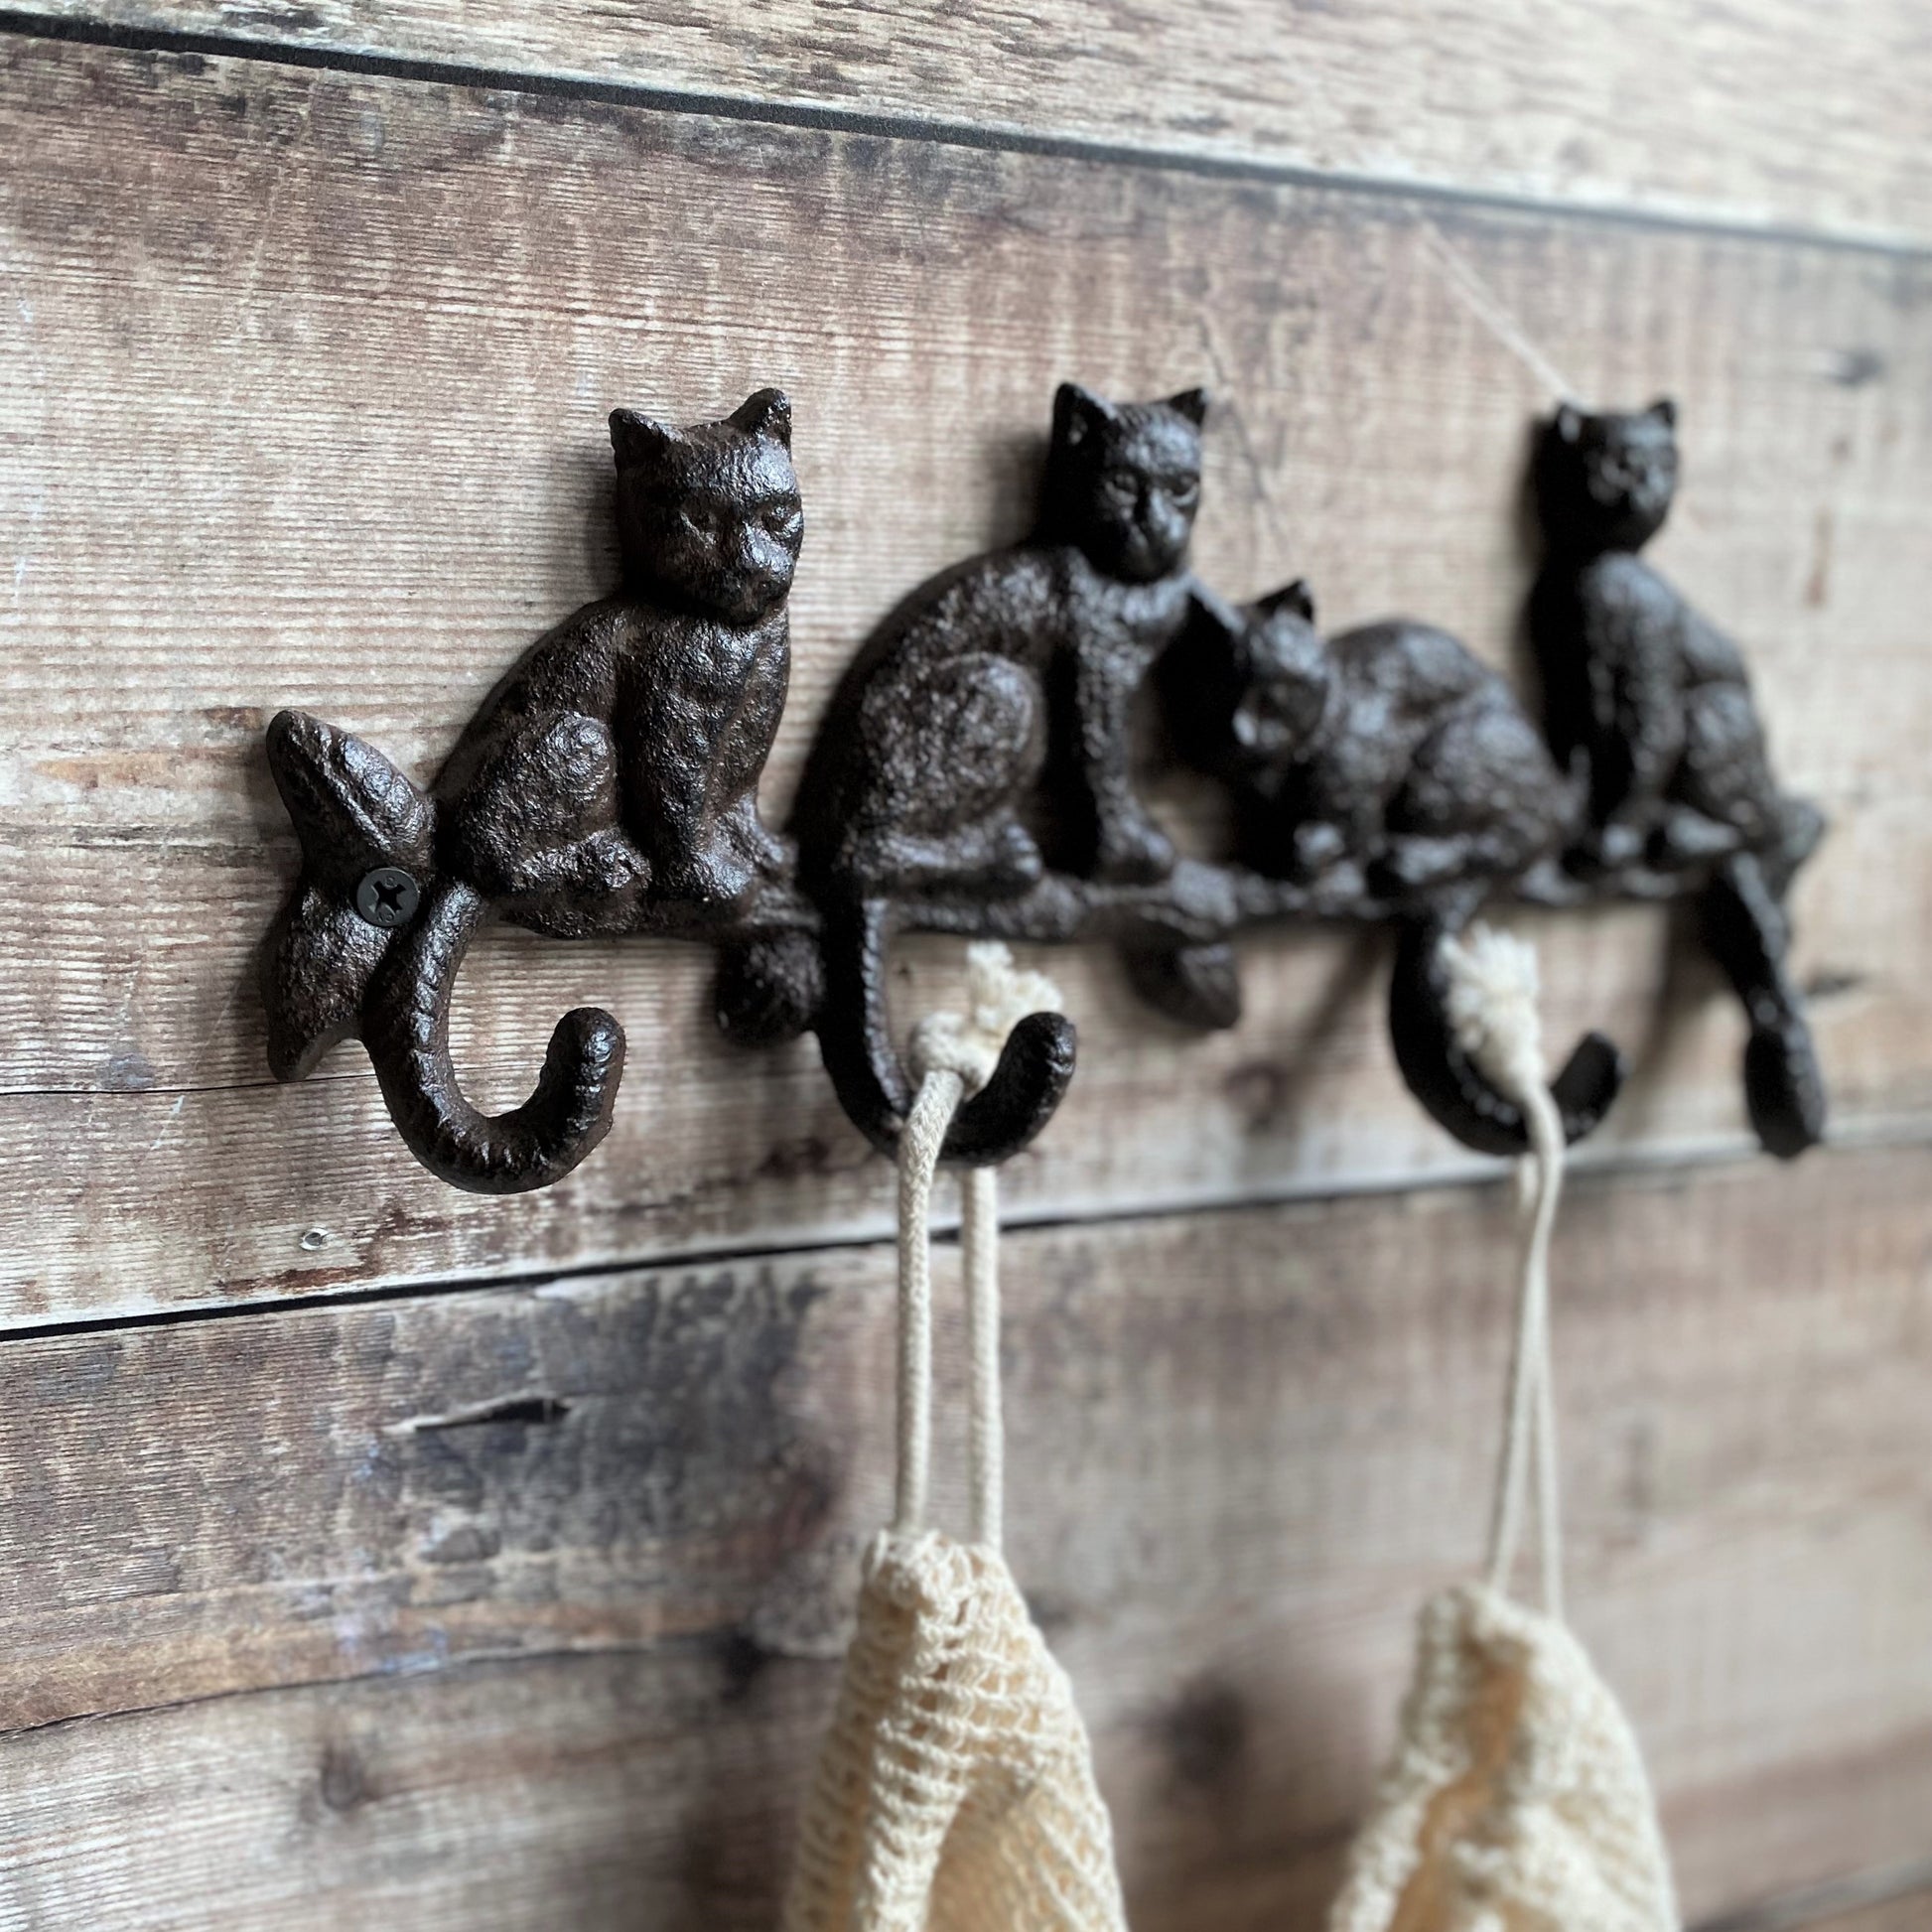  7 Cats Cast Iron Wall Mounted Hanger Rack - Decorative Cast  Iron Wall Hook Rack - Vintage Design Hanger with 7 Hooks - Wall Mounted